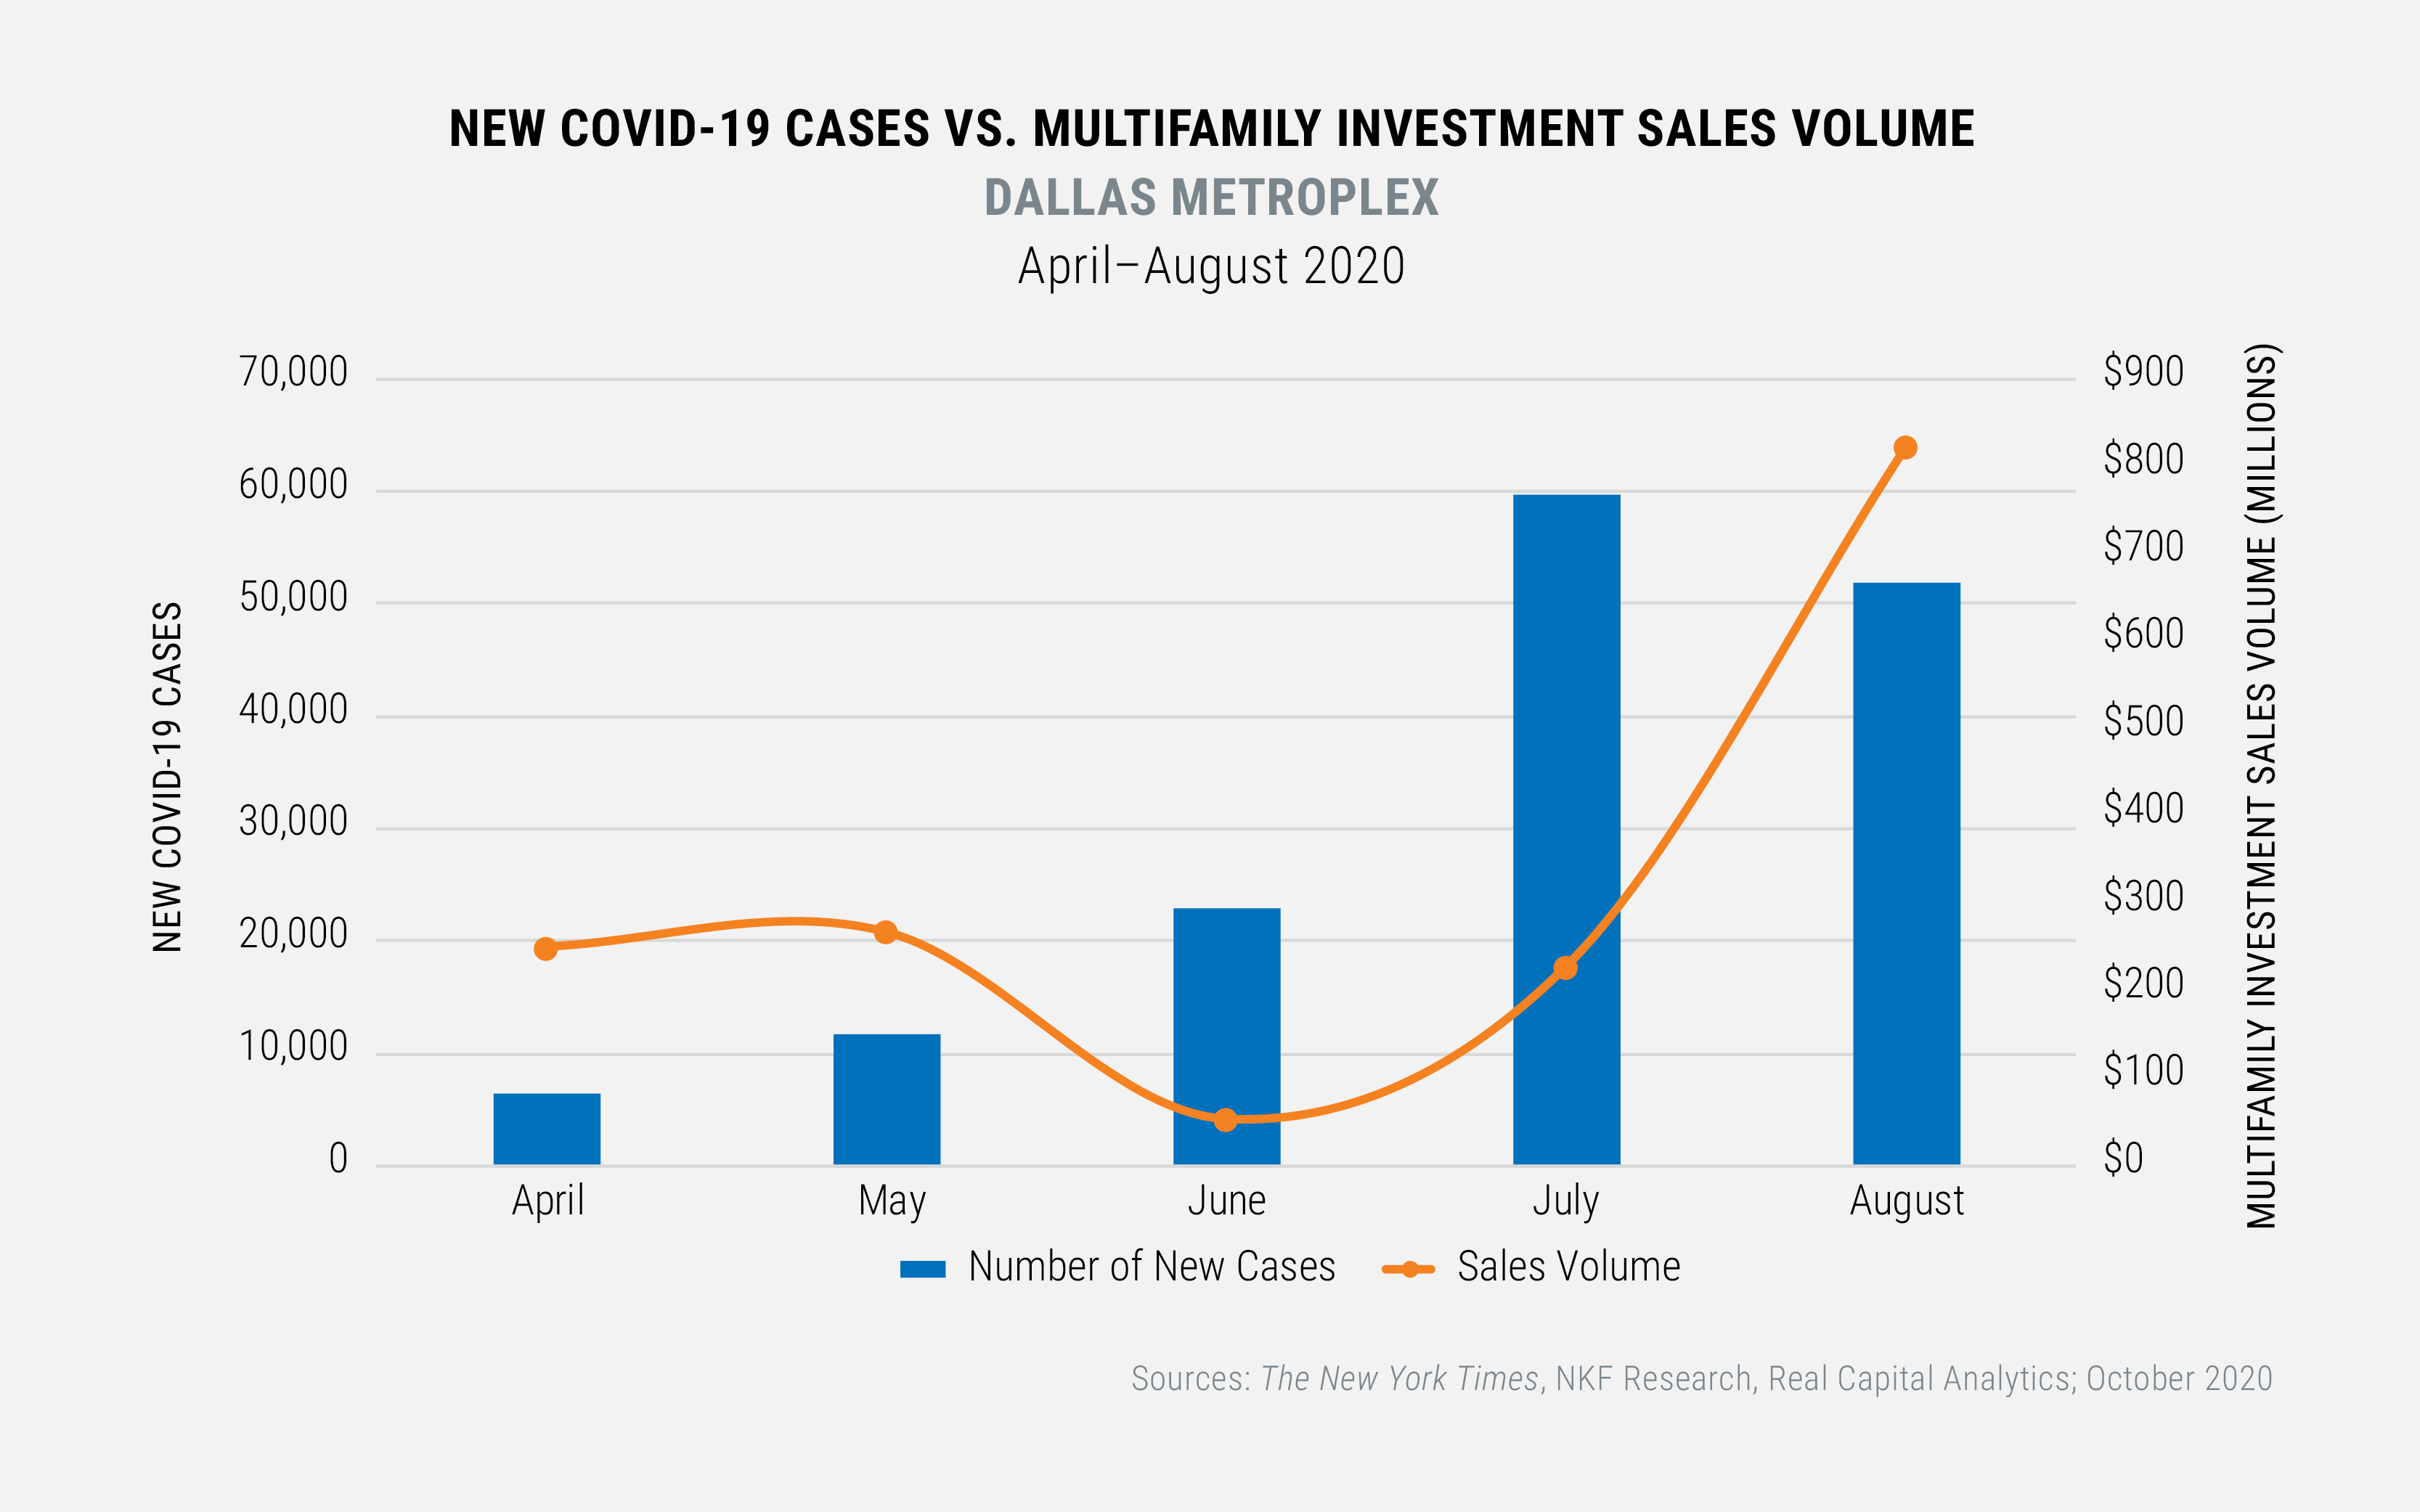 NEW COVID-19 CASES VS. MULTIFAMILY INVESTMENT SALES VOLUME